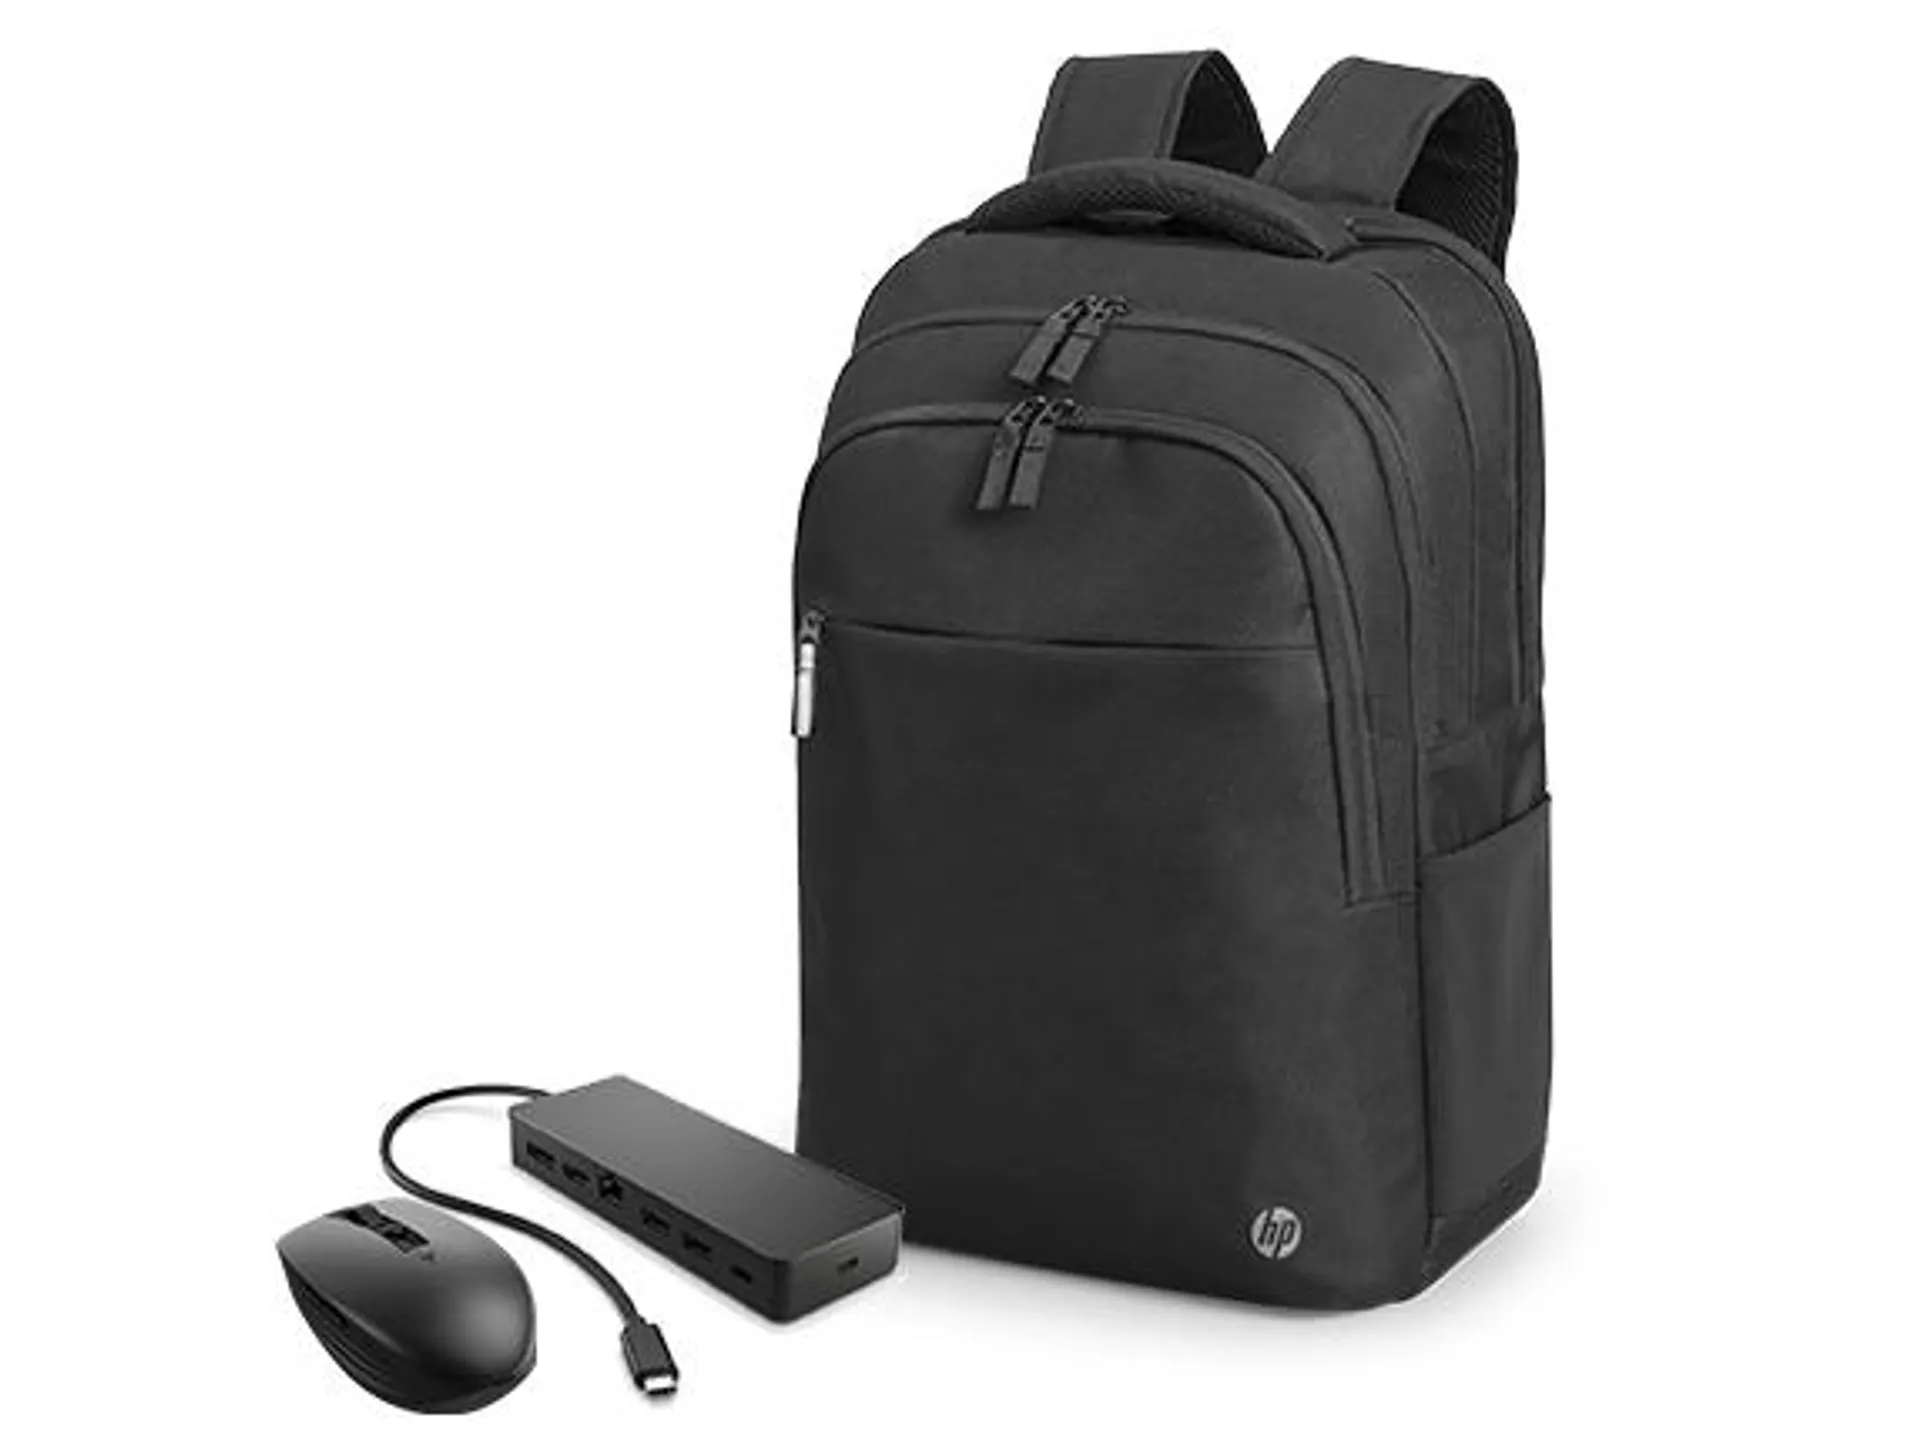 HP USB-C Hub, Wireless Mouse, and HP Renew Backpack Bundle for Teachers